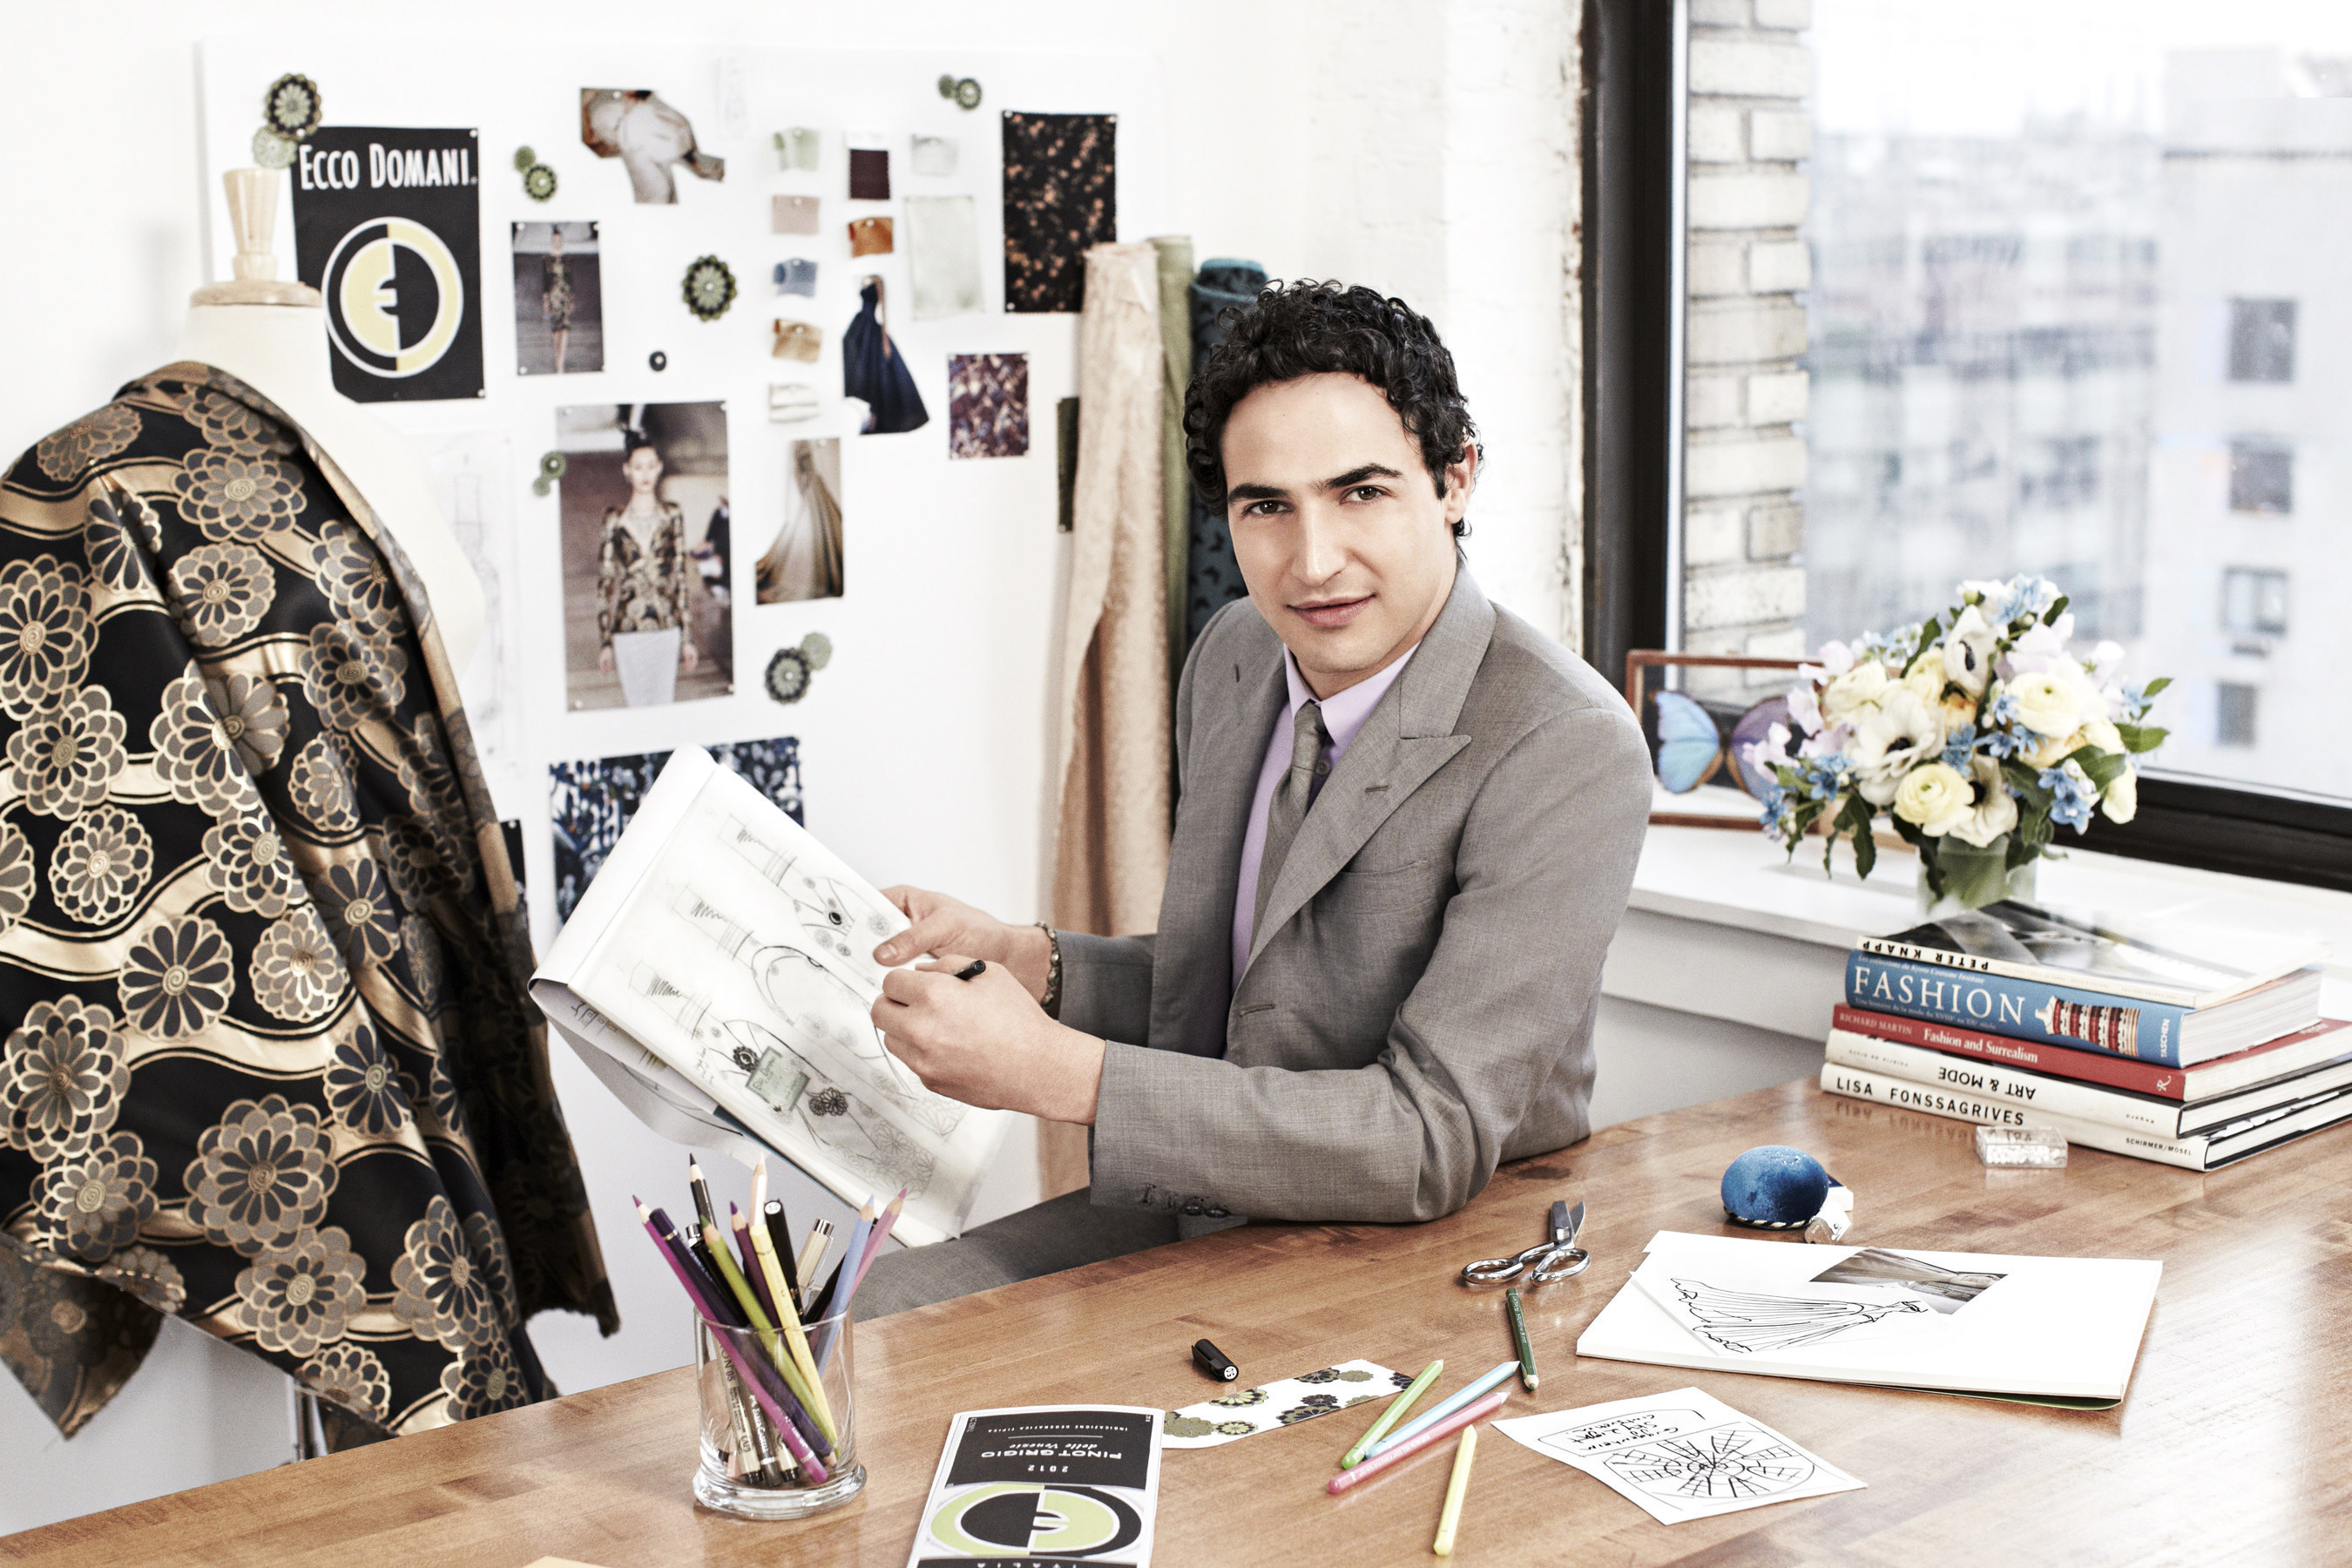 Fashion designer Zac Posen, whose designs can be found on celebrities who grace the red carpets, is bringing his signature style to Ecco Domani, America’s best-selling Italian Pinot Grigio. Ecco Domani’s Posen-designed Pinot Grigio will be available in stores nationwide that carry Ecco Domani starting in May 2015.